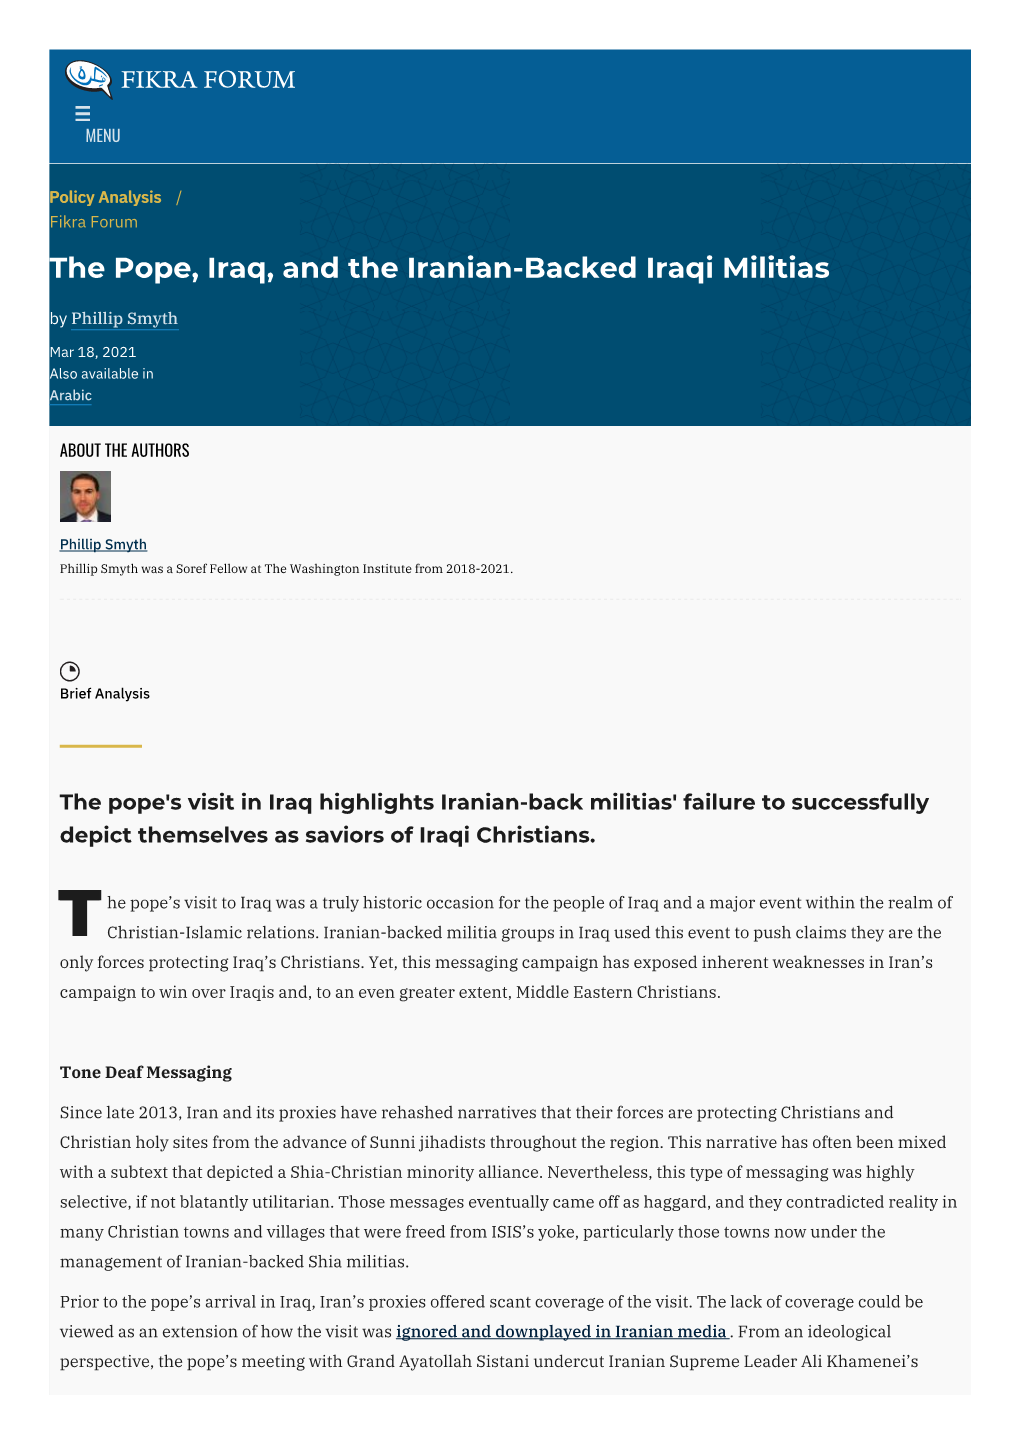 The Pope, Iraq, and the Iranian-Backed Iraqi Militias | The